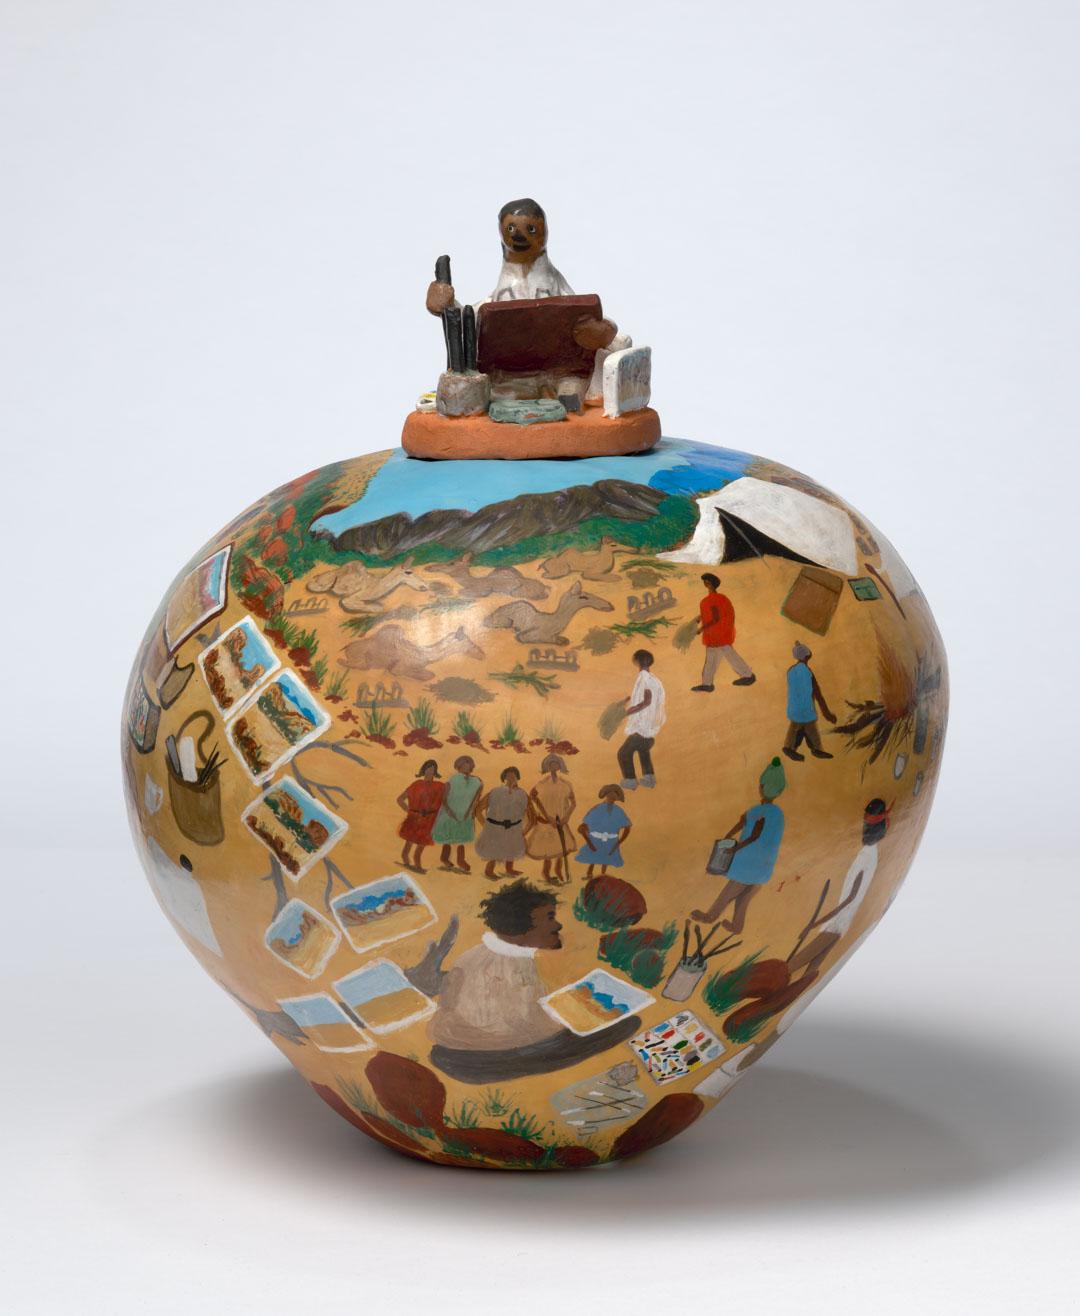 Artwork Albert Namatjira this artwork made of Earthenware, hand-built terracotta clay with underglaze colours and applied decoration